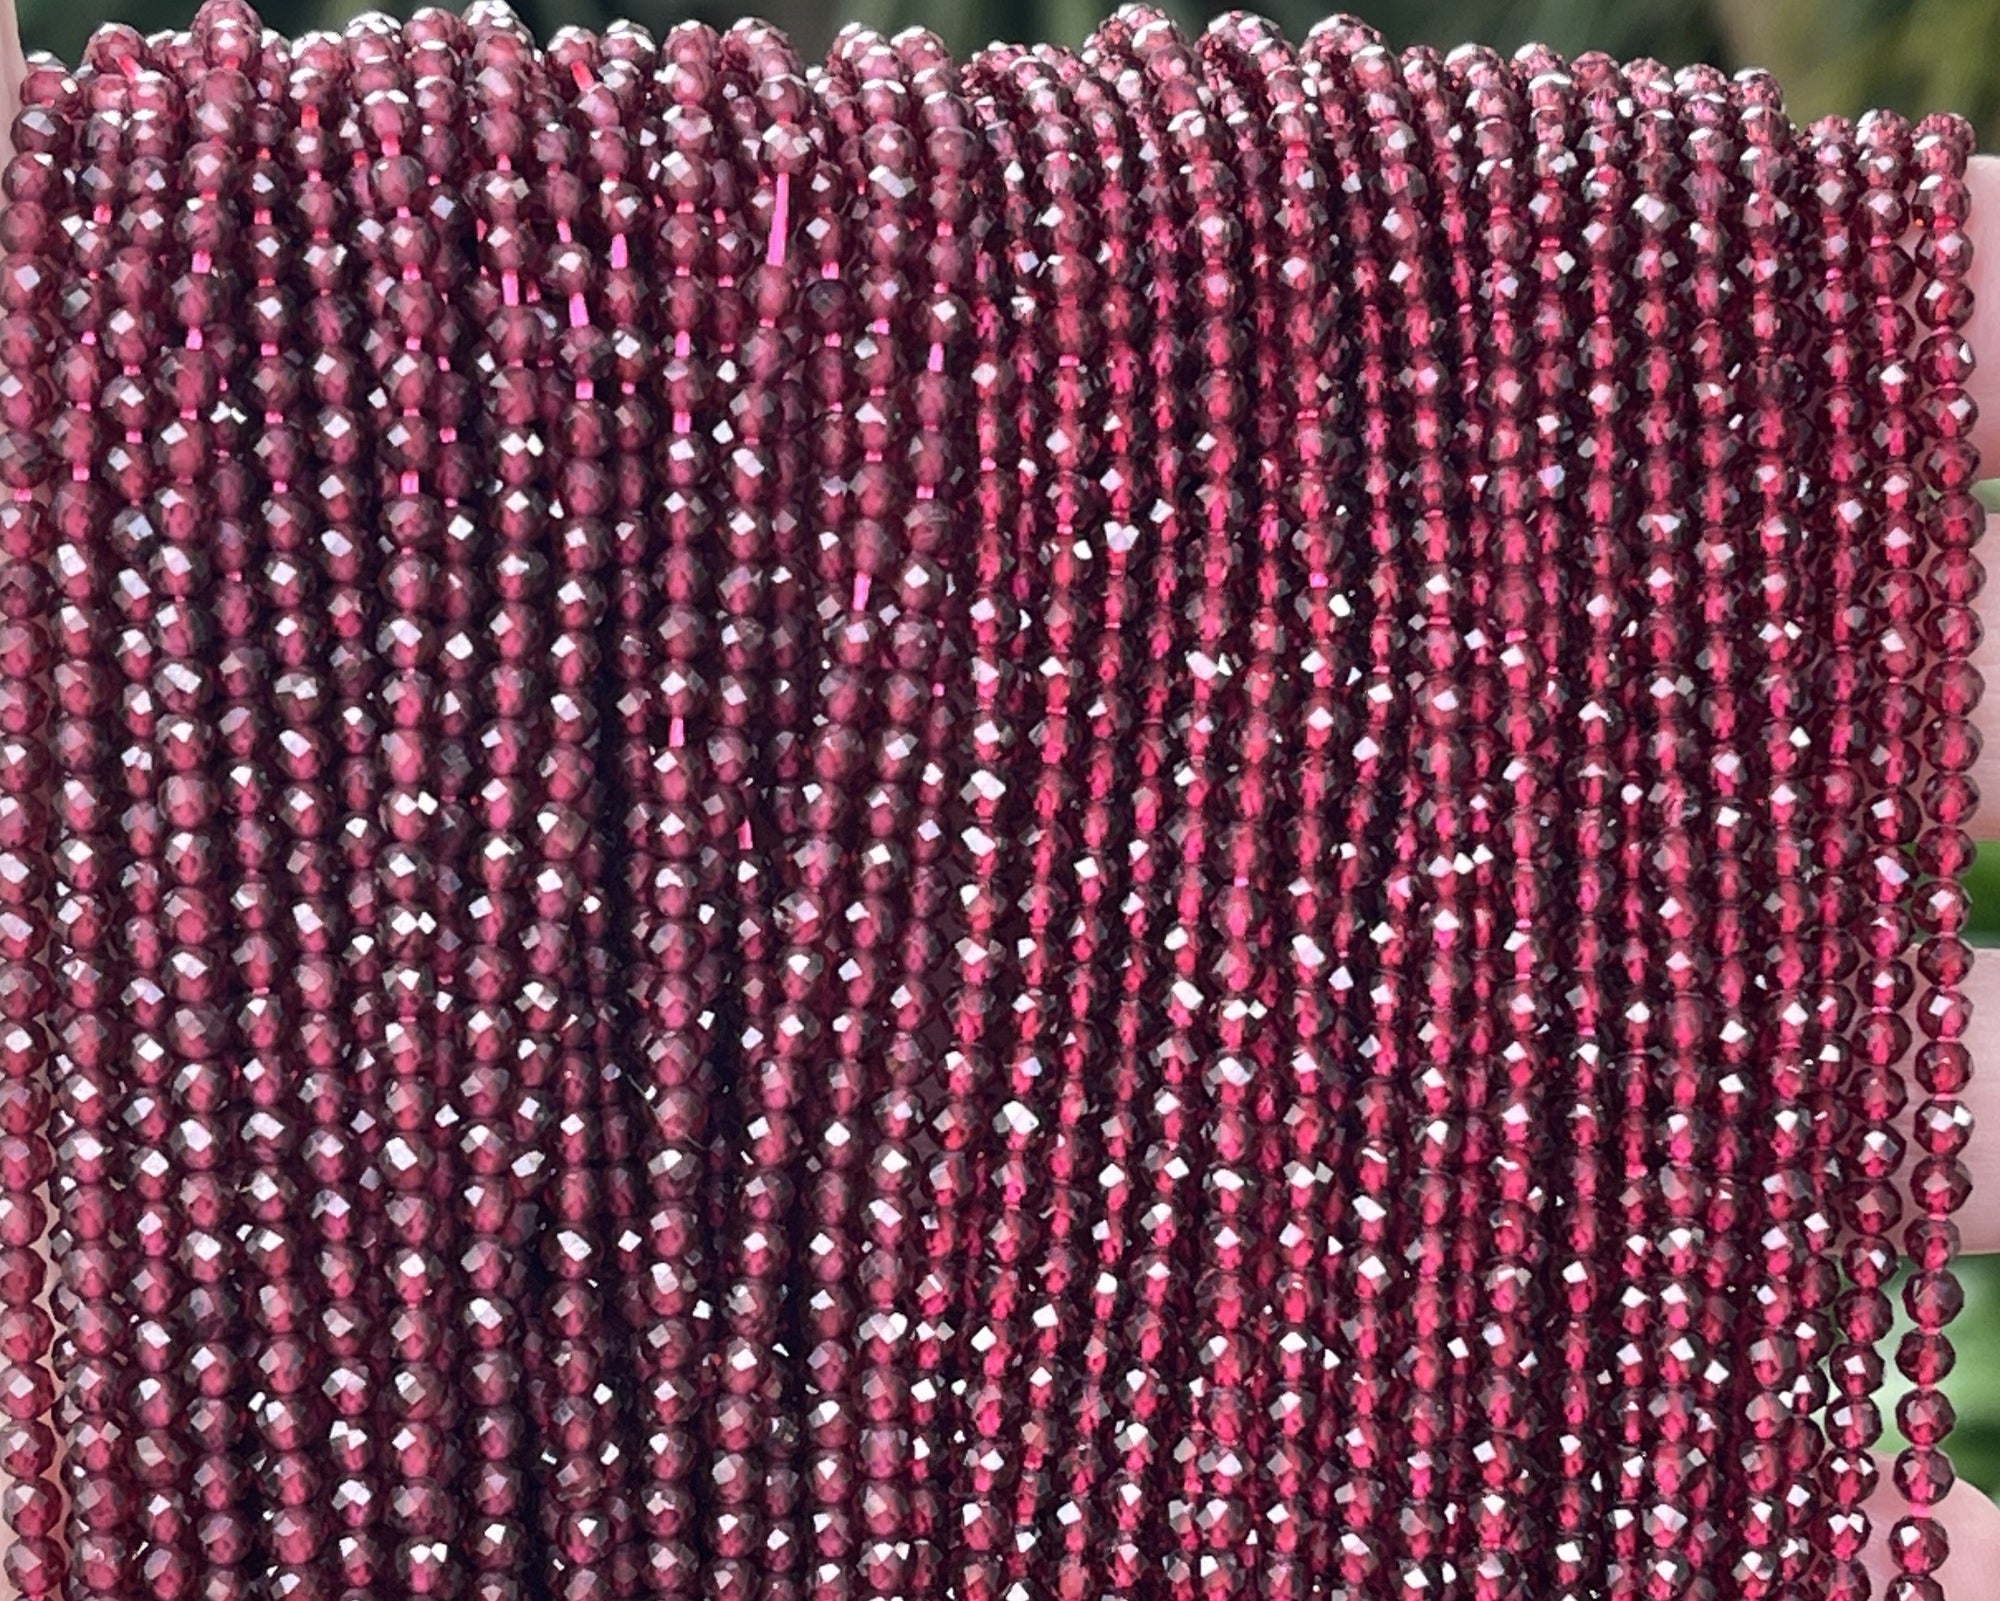 Red Garnet 3mm faceted round natural gemstone beads 15.5" strand - Oz Beads 